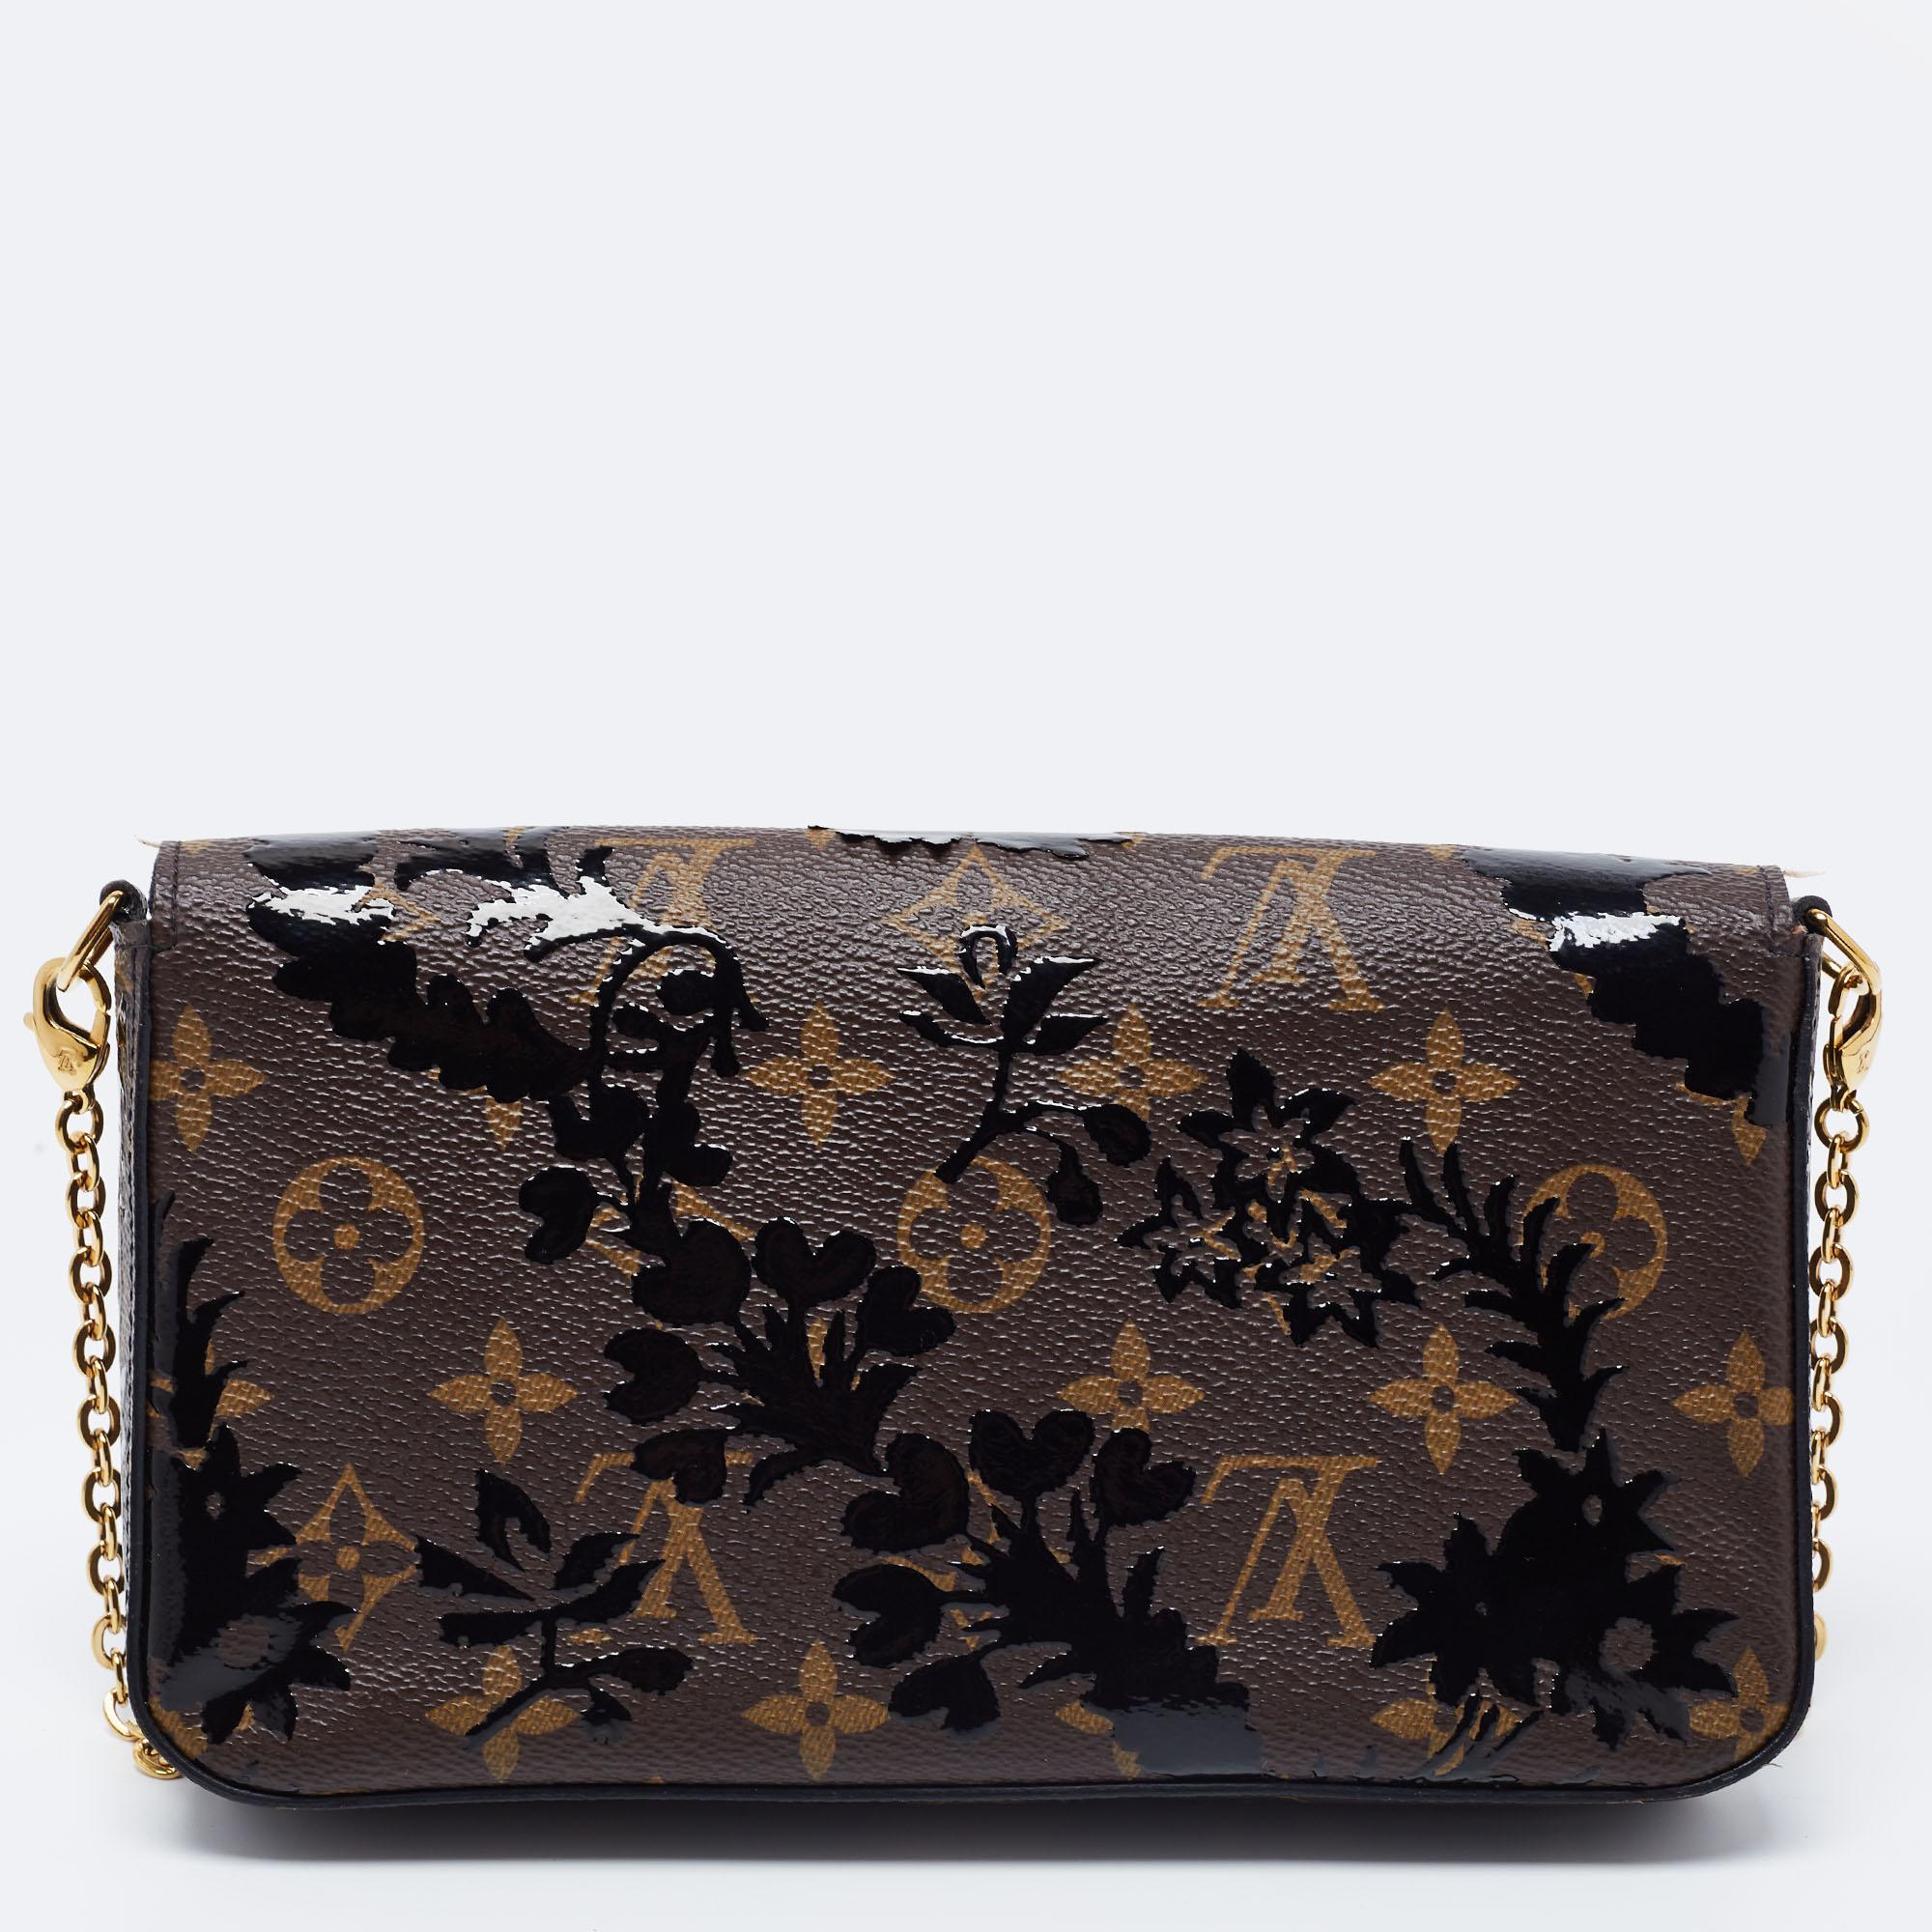 This Limited Edition Blossom Félicie Pochette has been designed to be a shoulder bag as well as a clutch. It is crafted from Monogram canvas and has a canvas-lined interior, an envelope flap, and a chain. The chic bag comes in a convenient size that